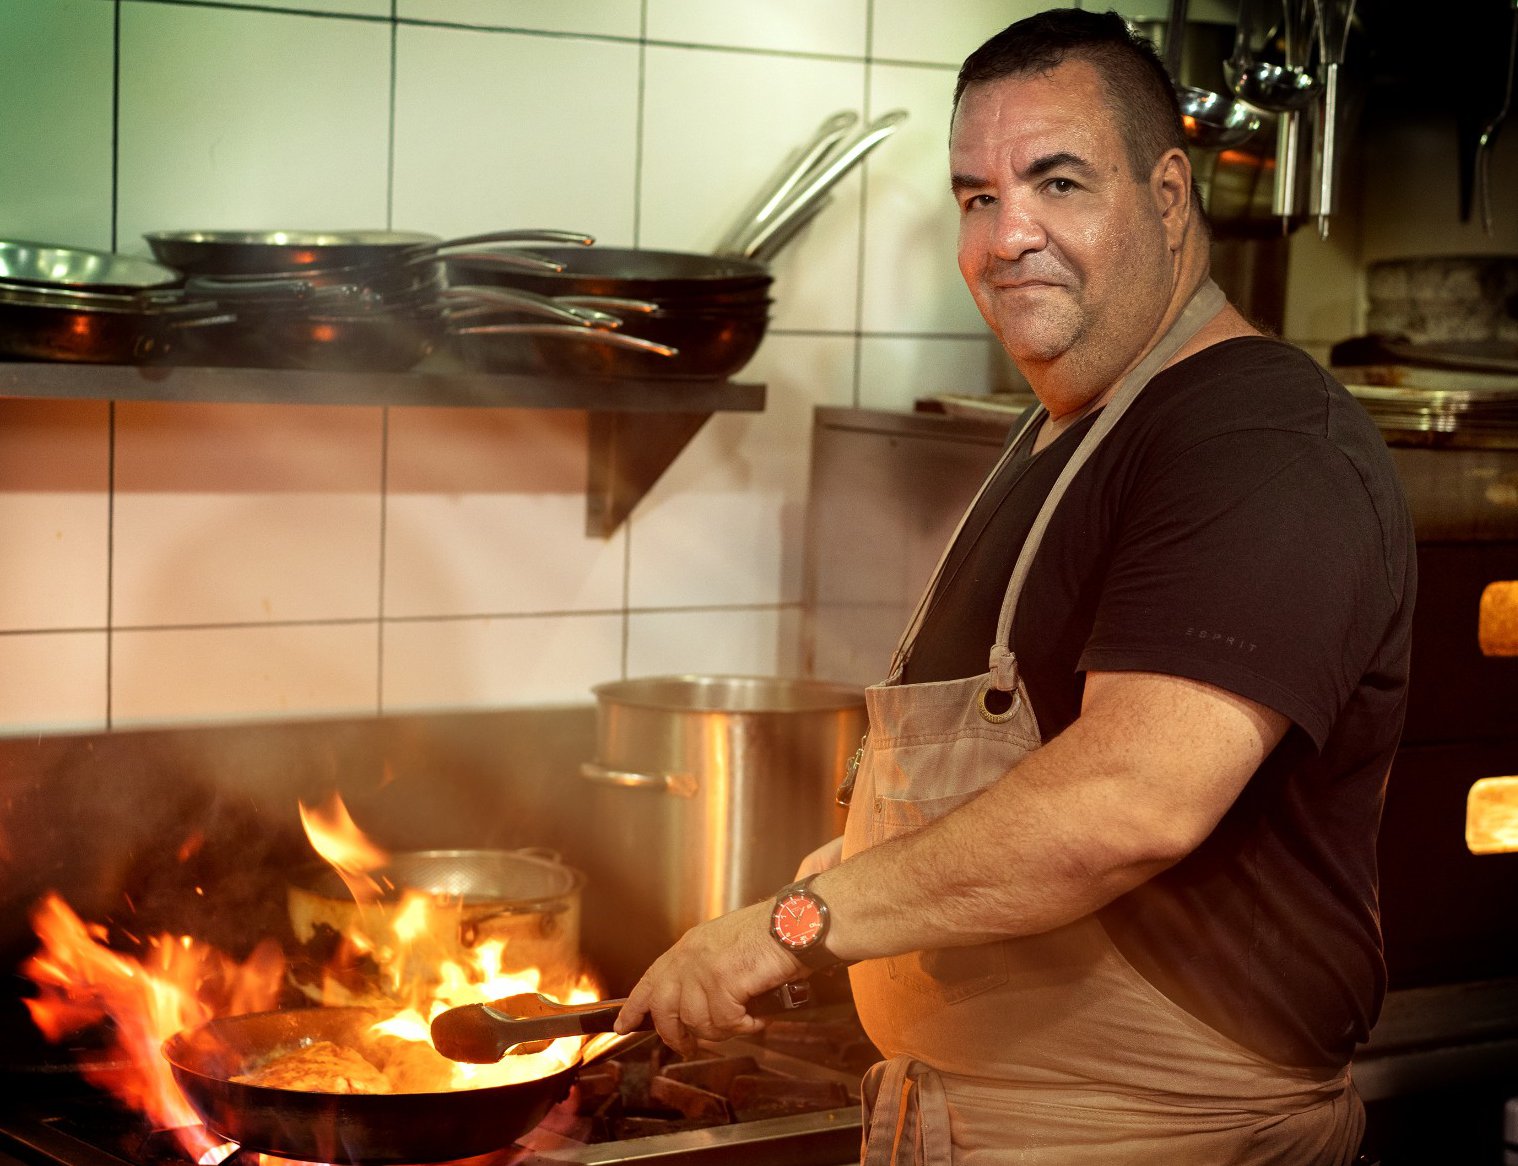 Xpat Interview: Harlan Goldstein, Owner & Chef At 'Comfort By Harlan' Restaurant In Thailand